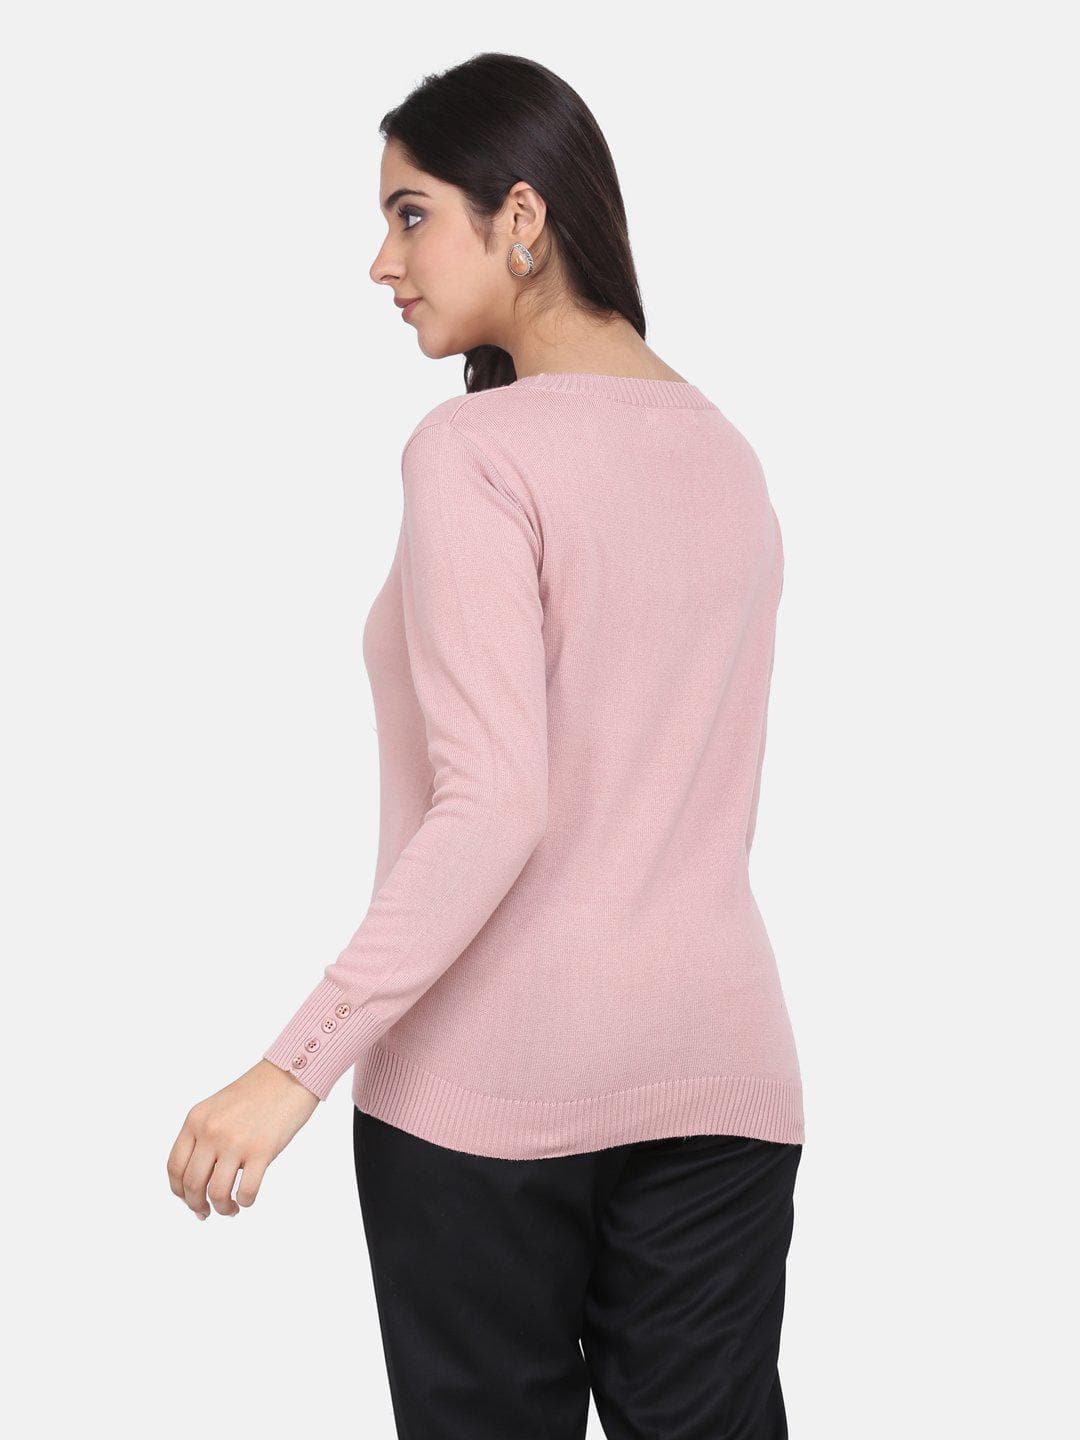 Cotton Pullover For Women - Onion Pink